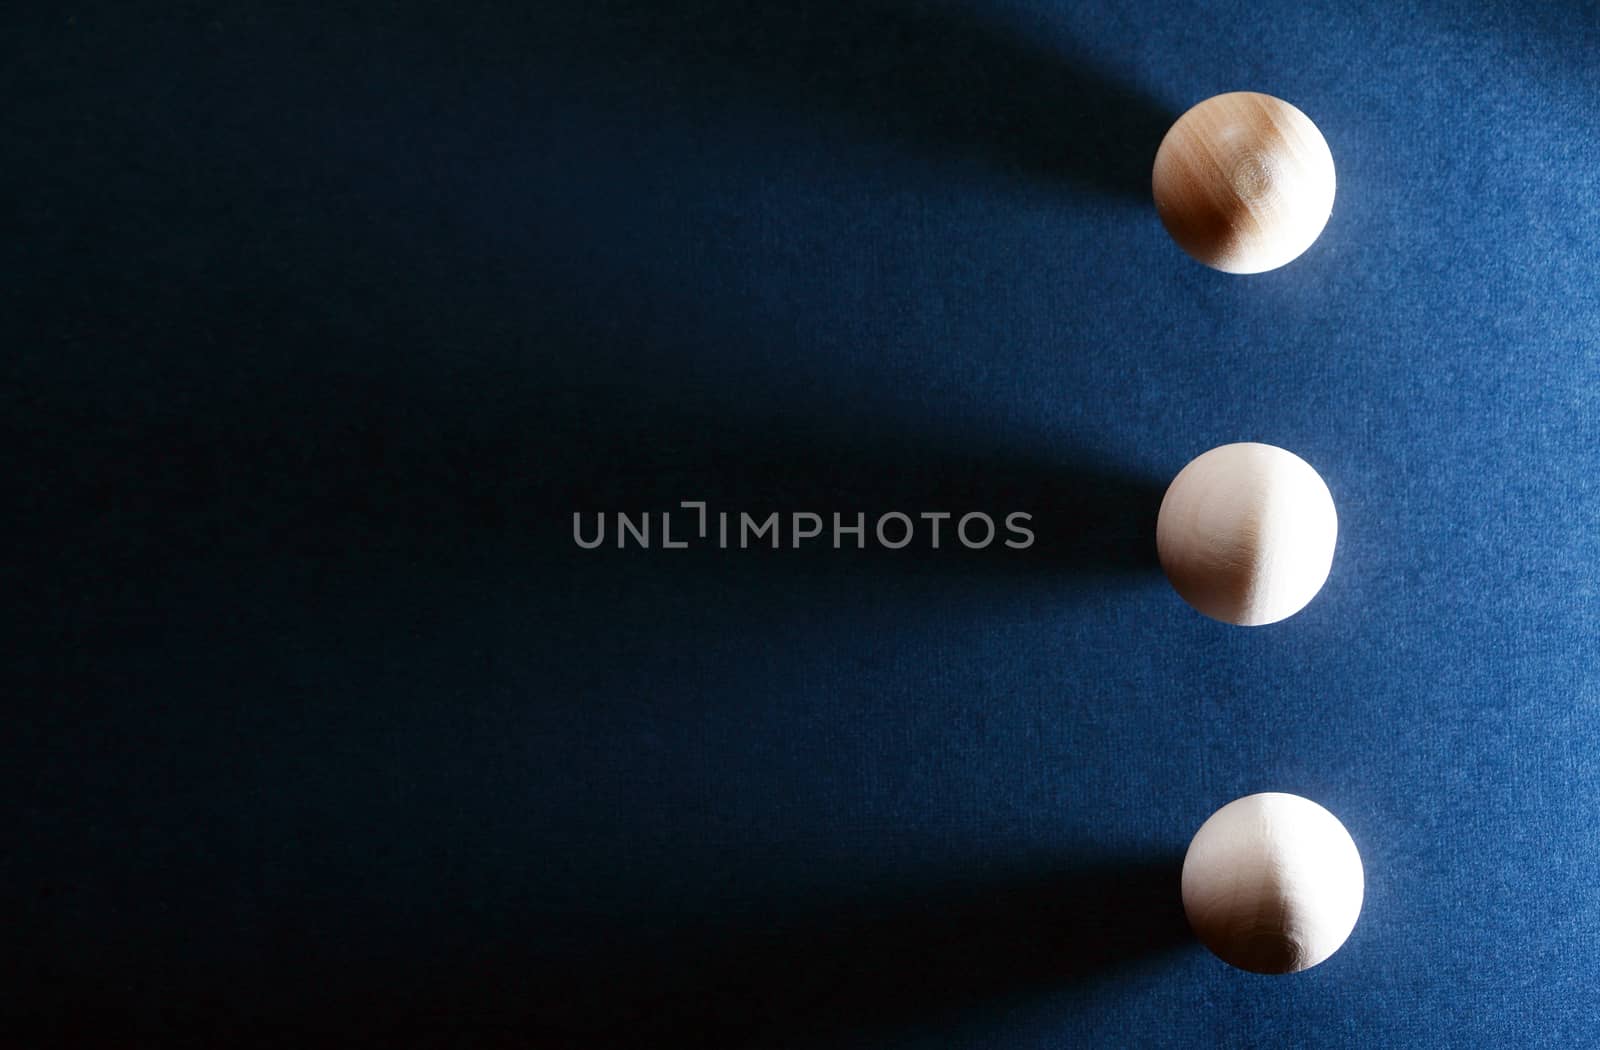 Abstract composition with three small wooden balls on dark blue background